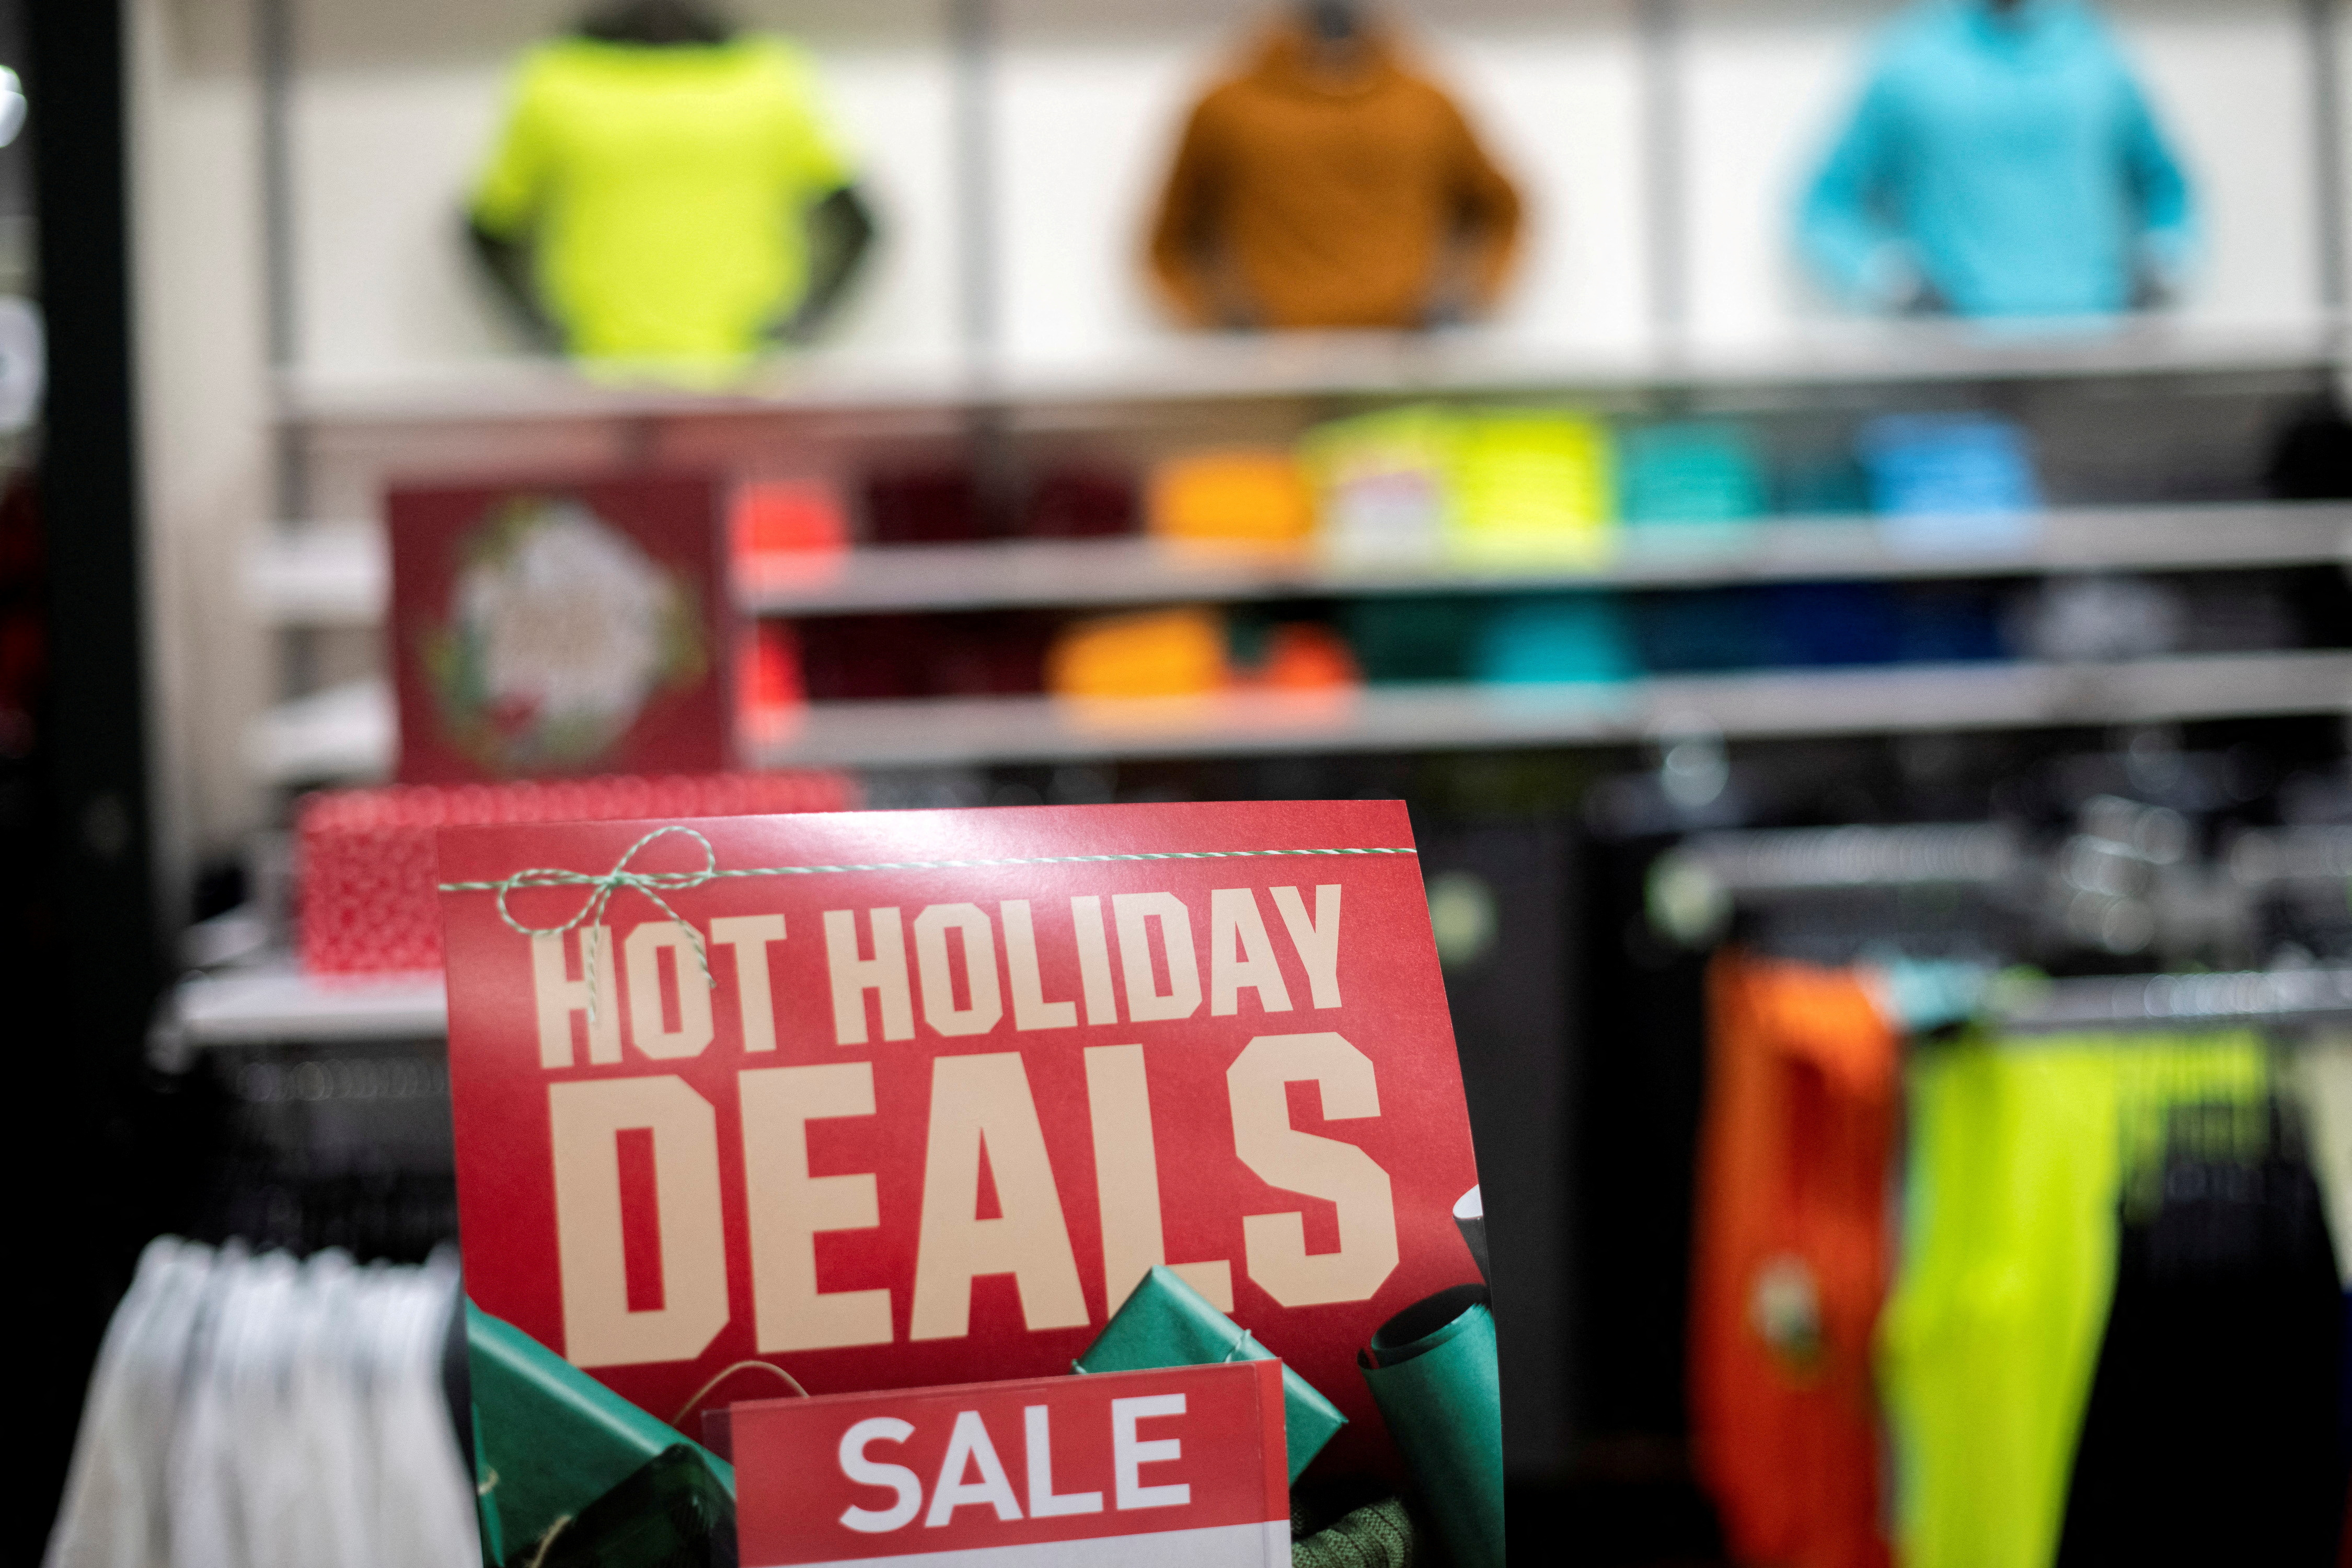 Athletic wear is displayed for sale beside a sign stating "HOT HOLIDAY DEALS SALE" at a Dick's Sporting Goods store in Collegeville